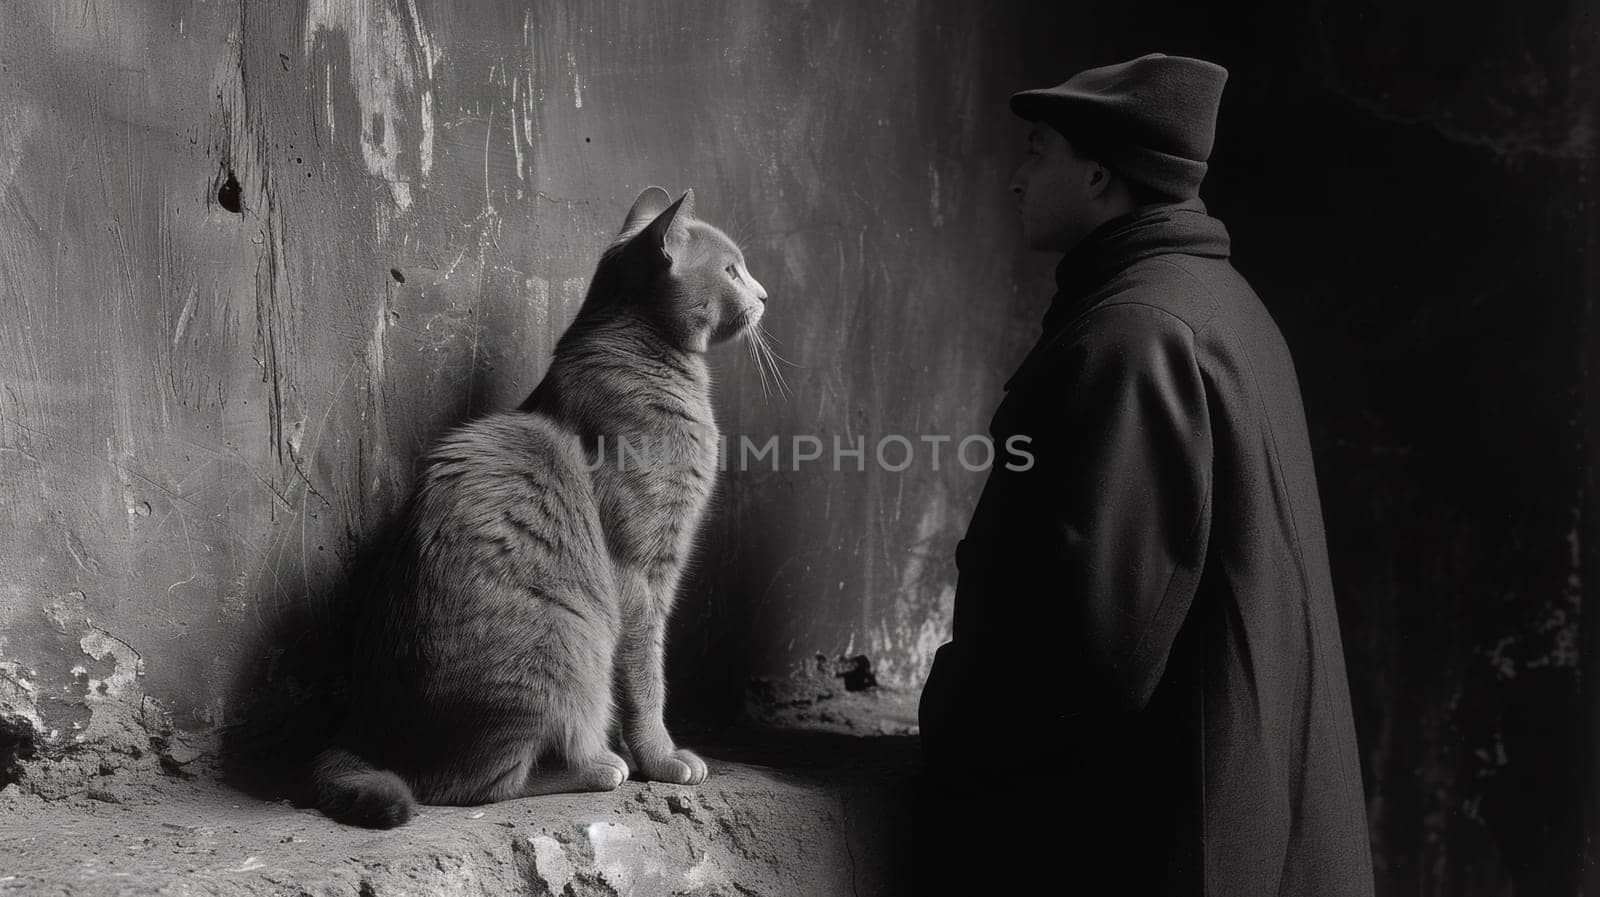 A man and cat looking at each other in a black and white photo